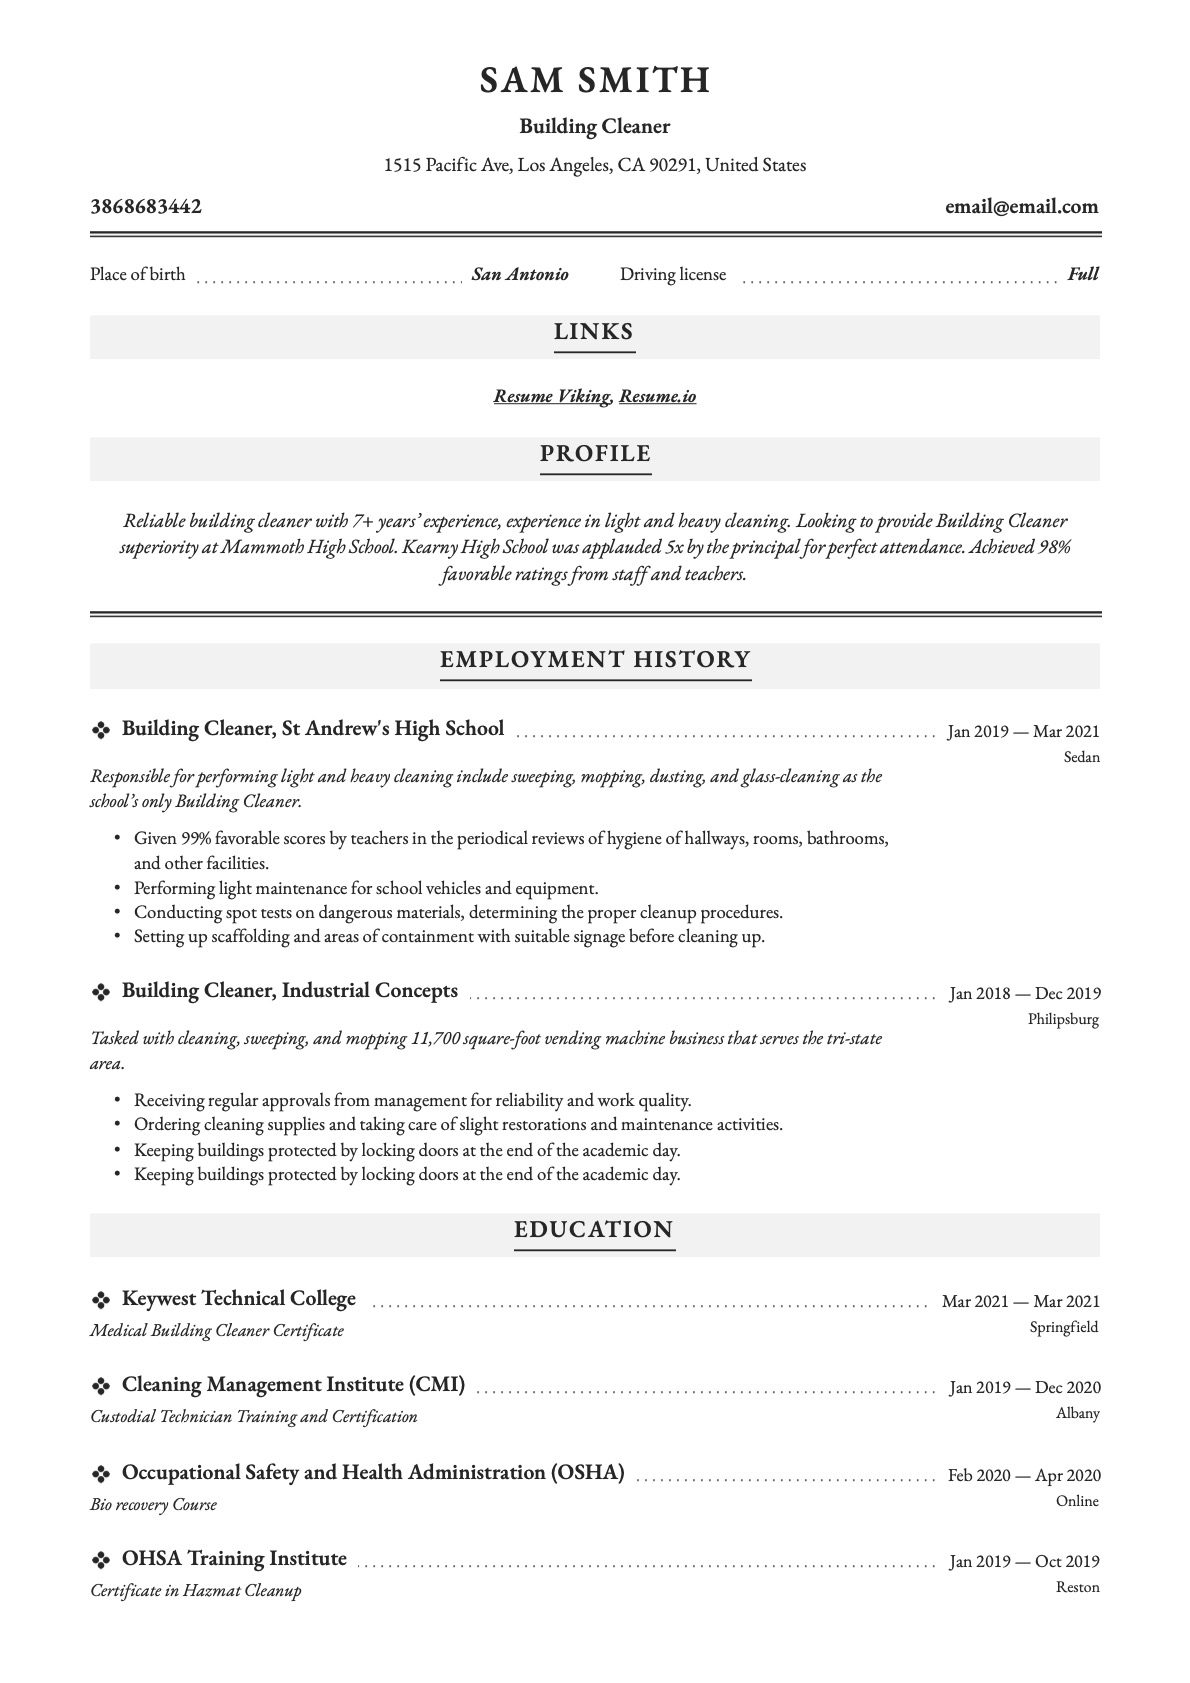 Example Resume Building Cleaner-10